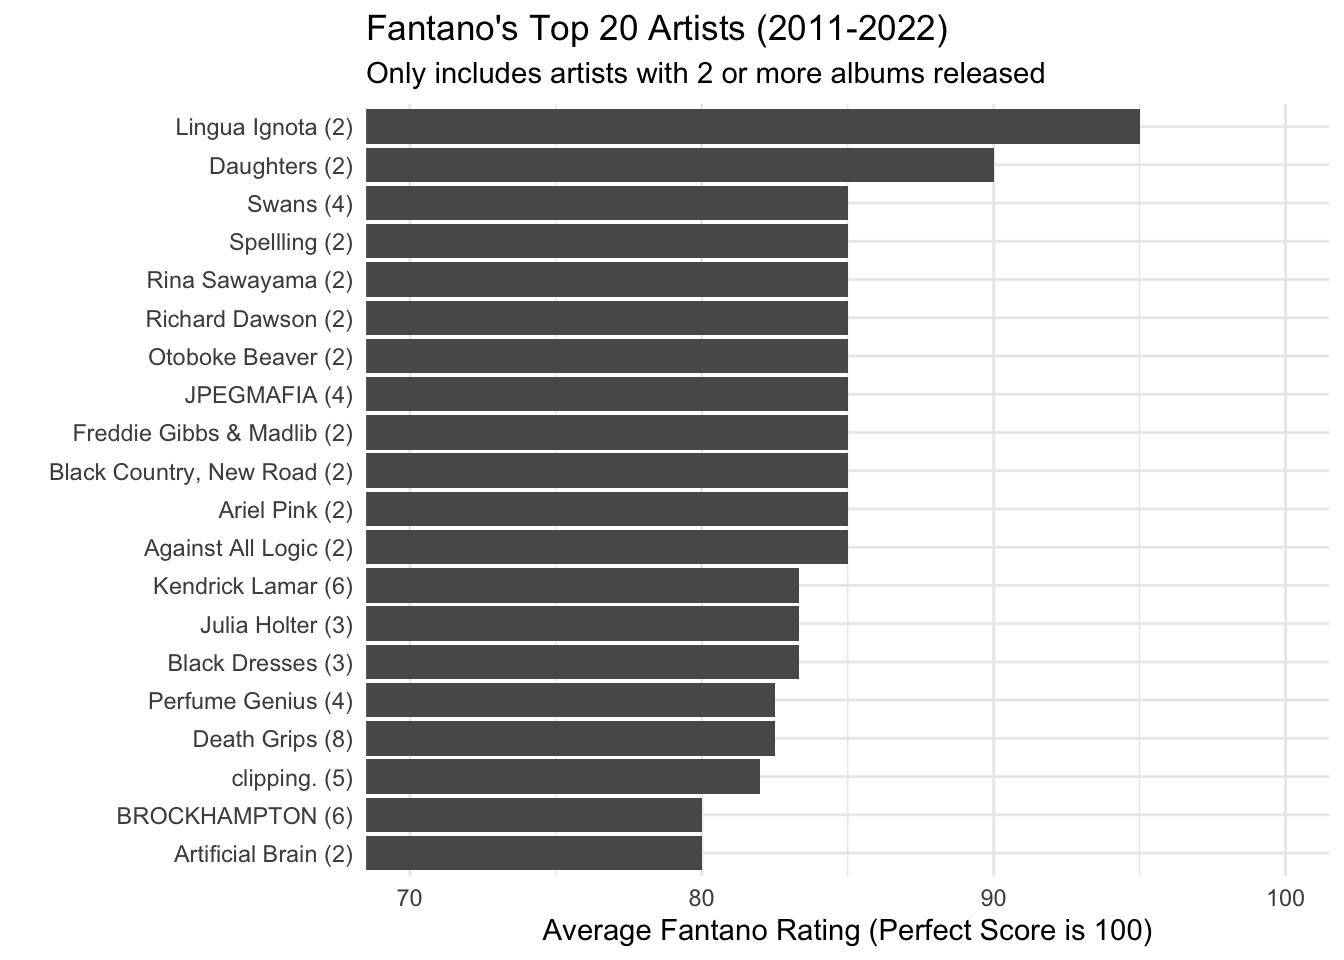 Anthony Fantano's favorite artists from 2011-2022 by average rating. Numbers in parenthesis denote number of albums reviewed by Fantano from 2011-2022.